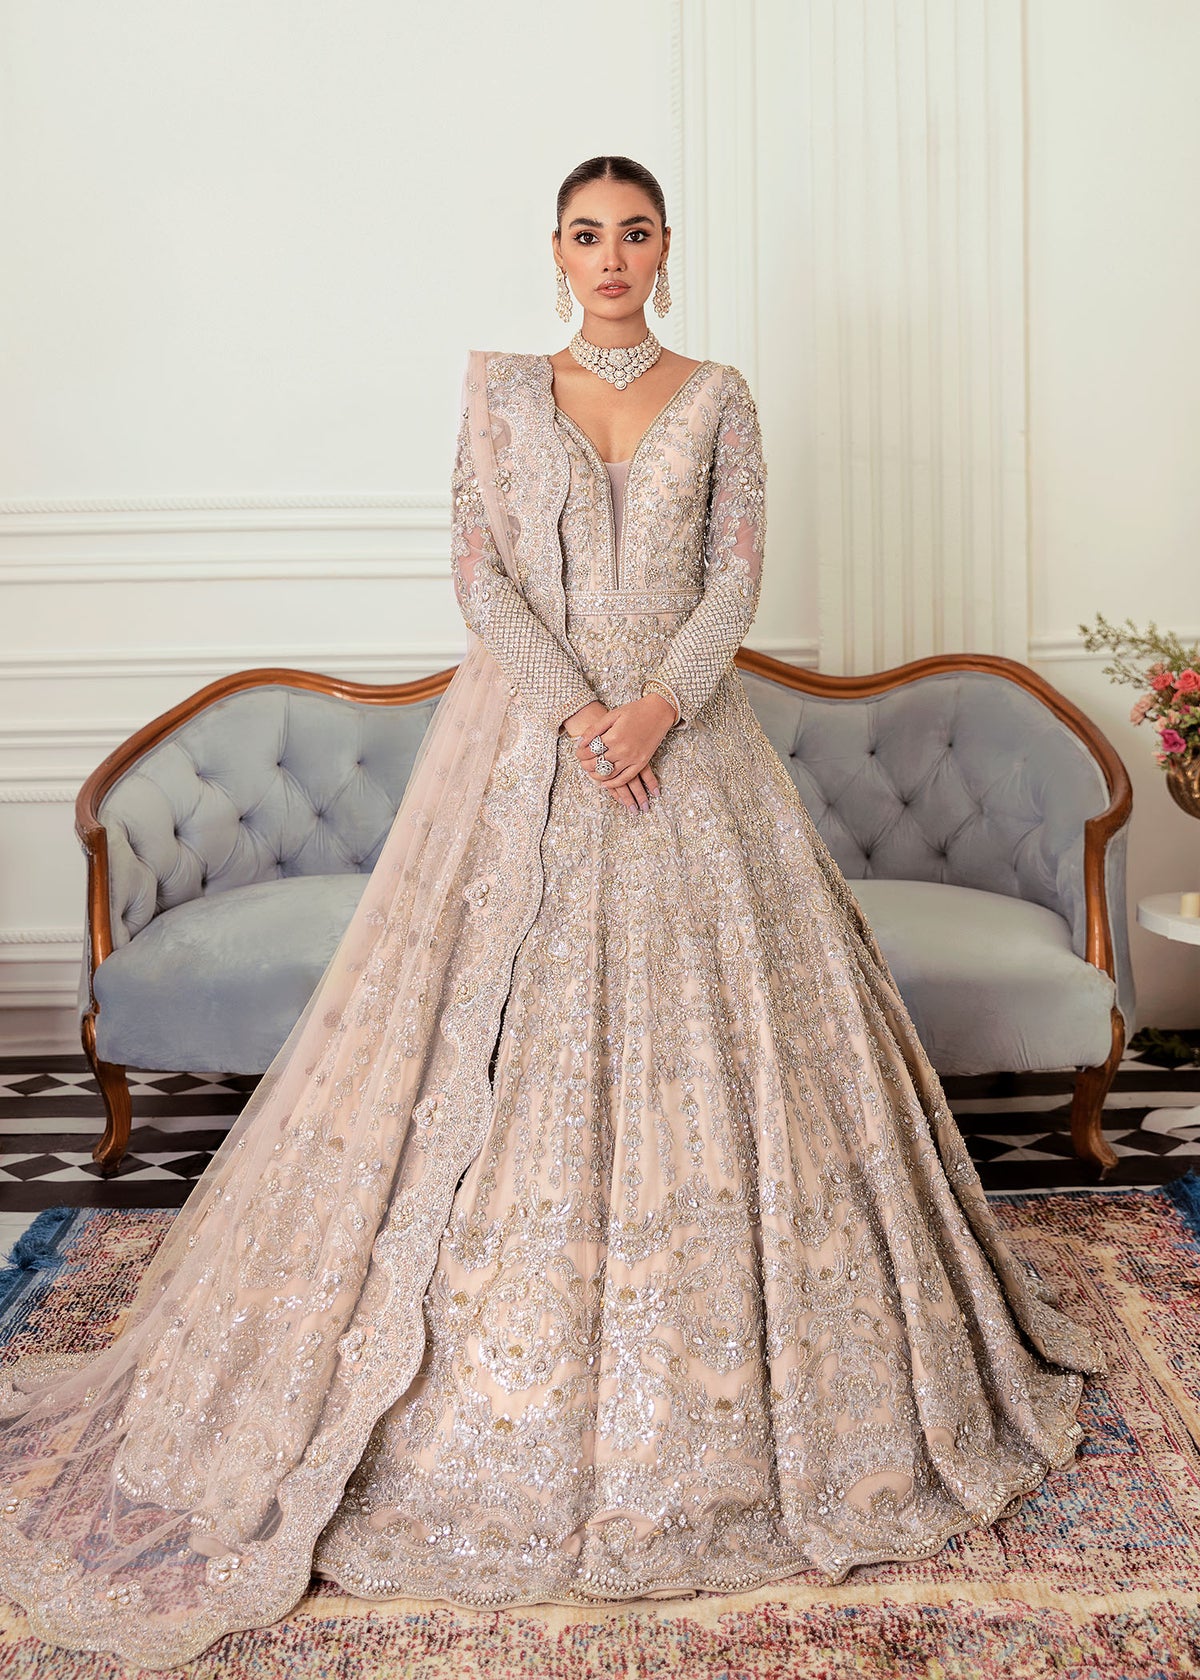 Bridal Dresses In Islamabad - Bridal Dresses In Islamabad With Prices -